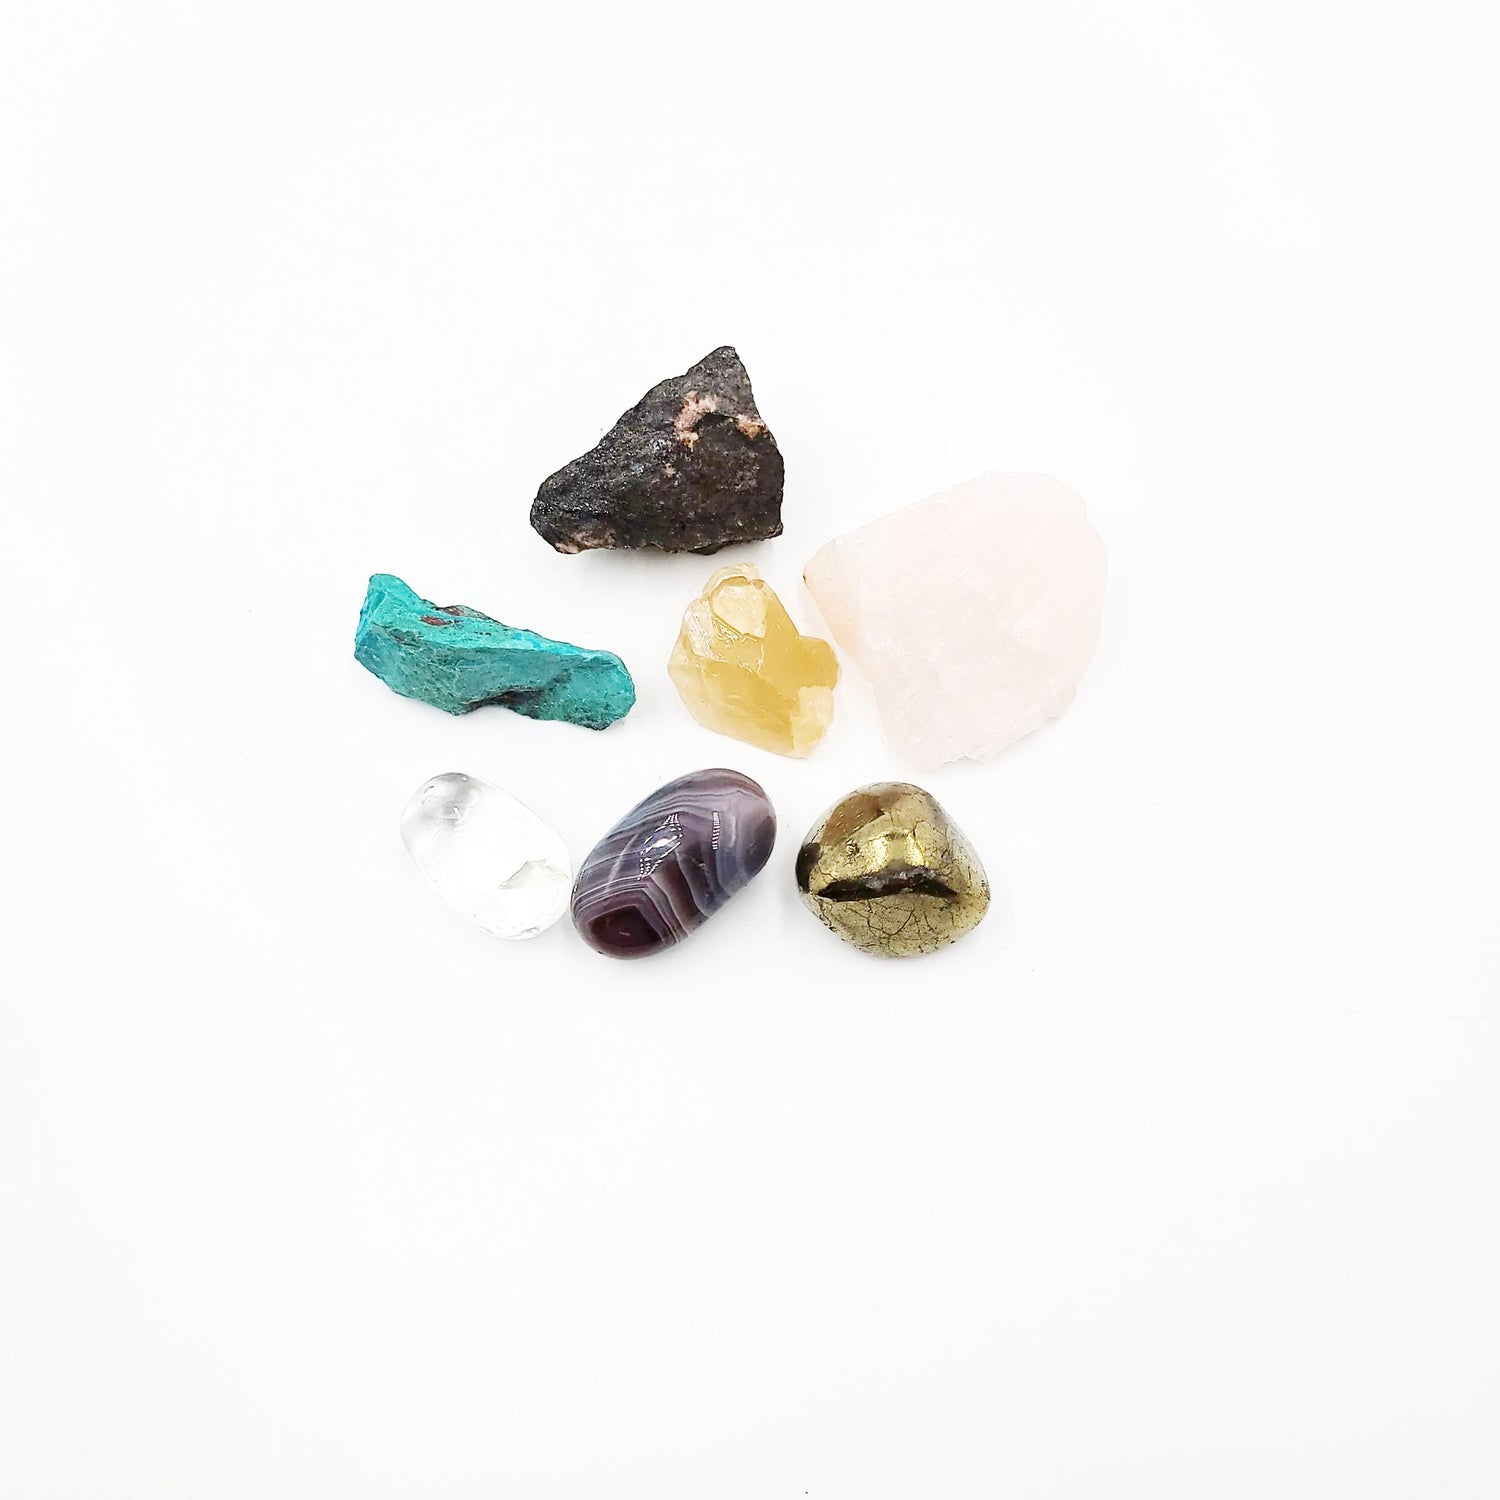 For the Love and Money - Love & Money Stone Set - Elevated Metaphysical